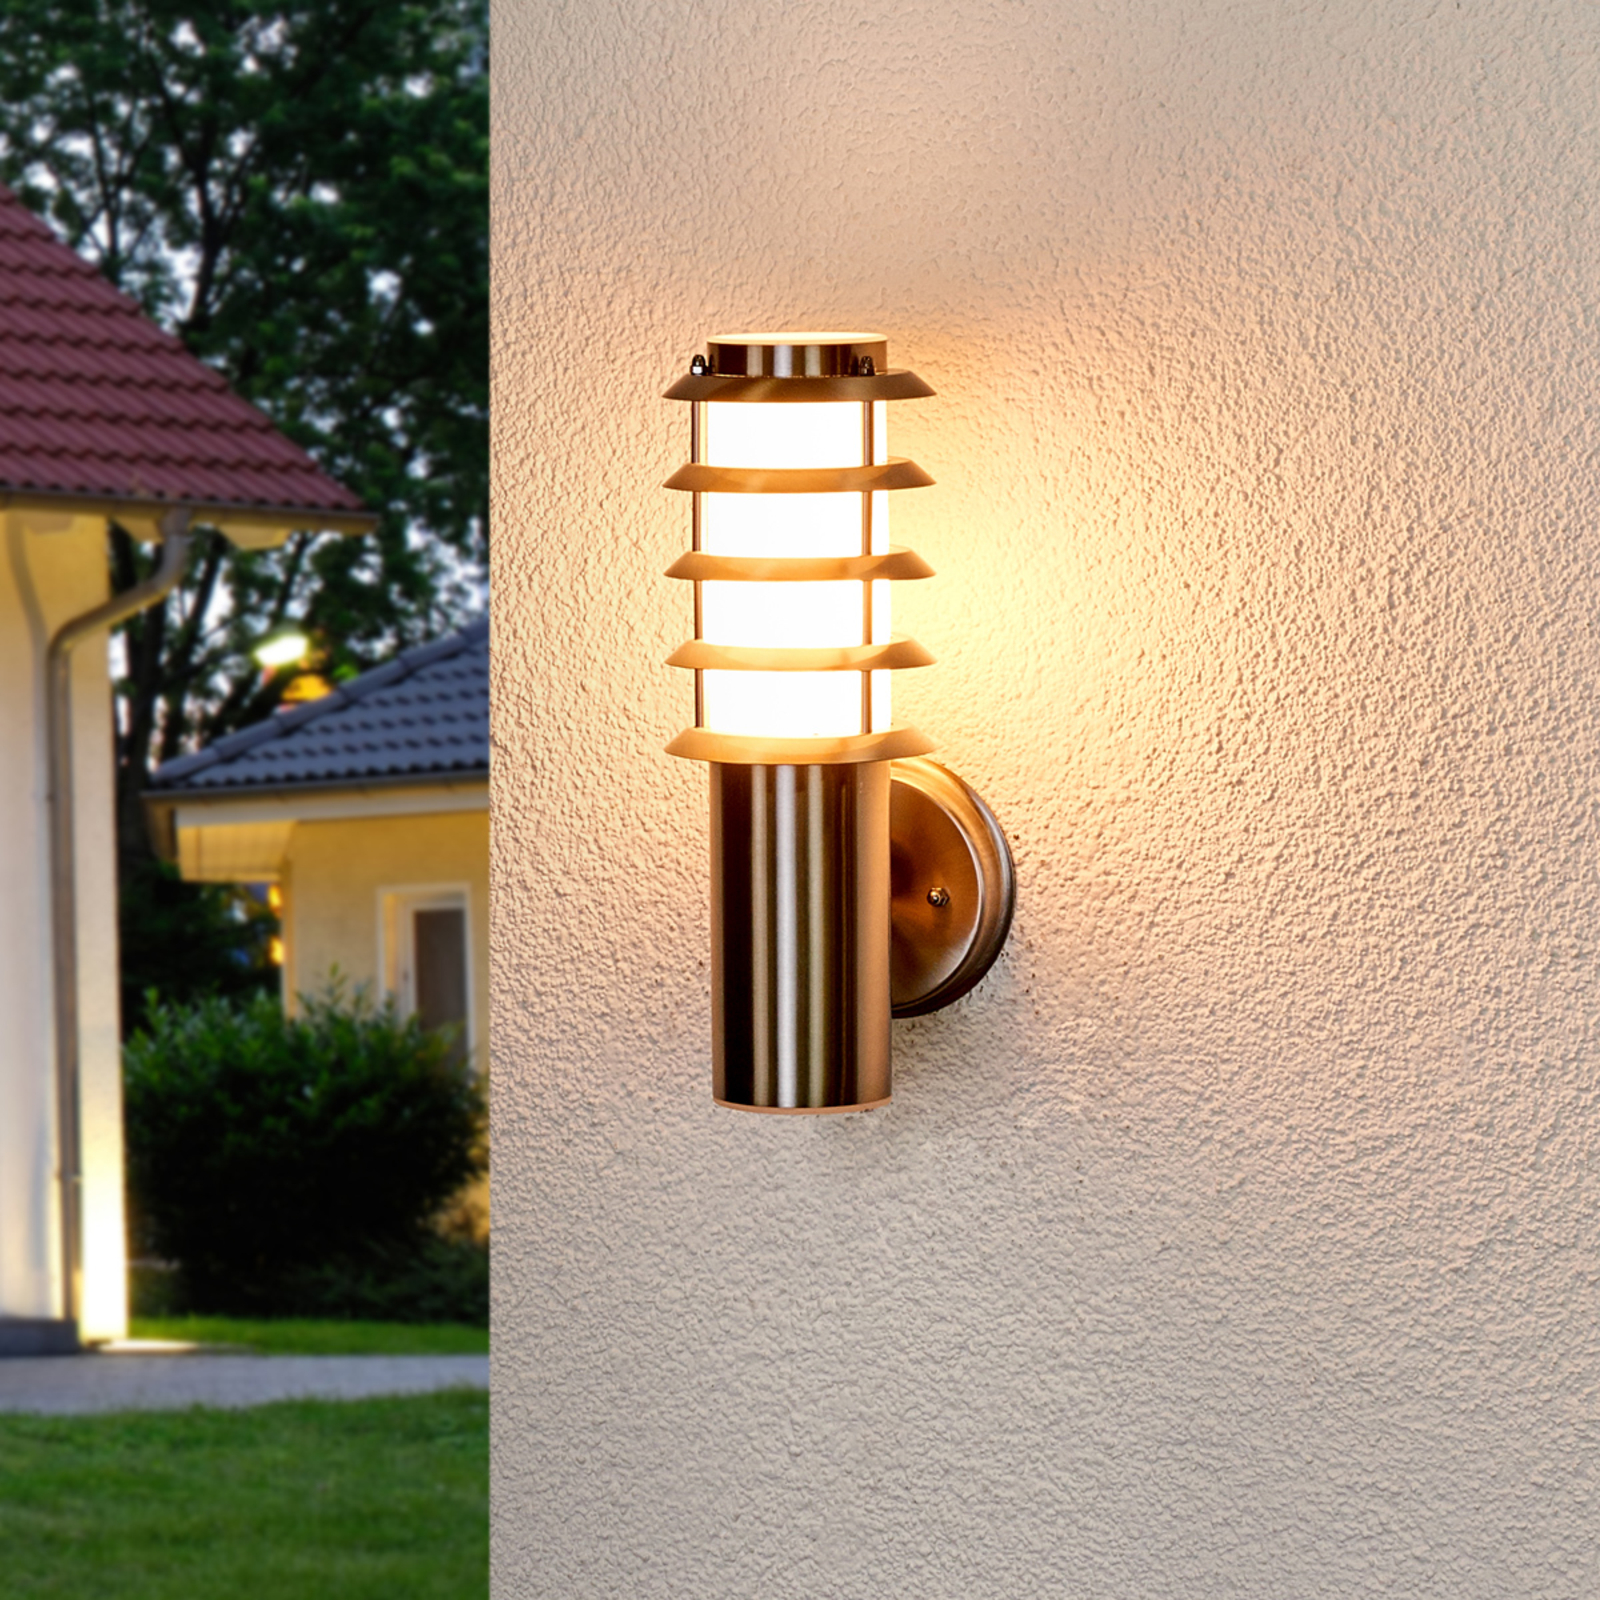 Selina stainless steel outdoor wall light